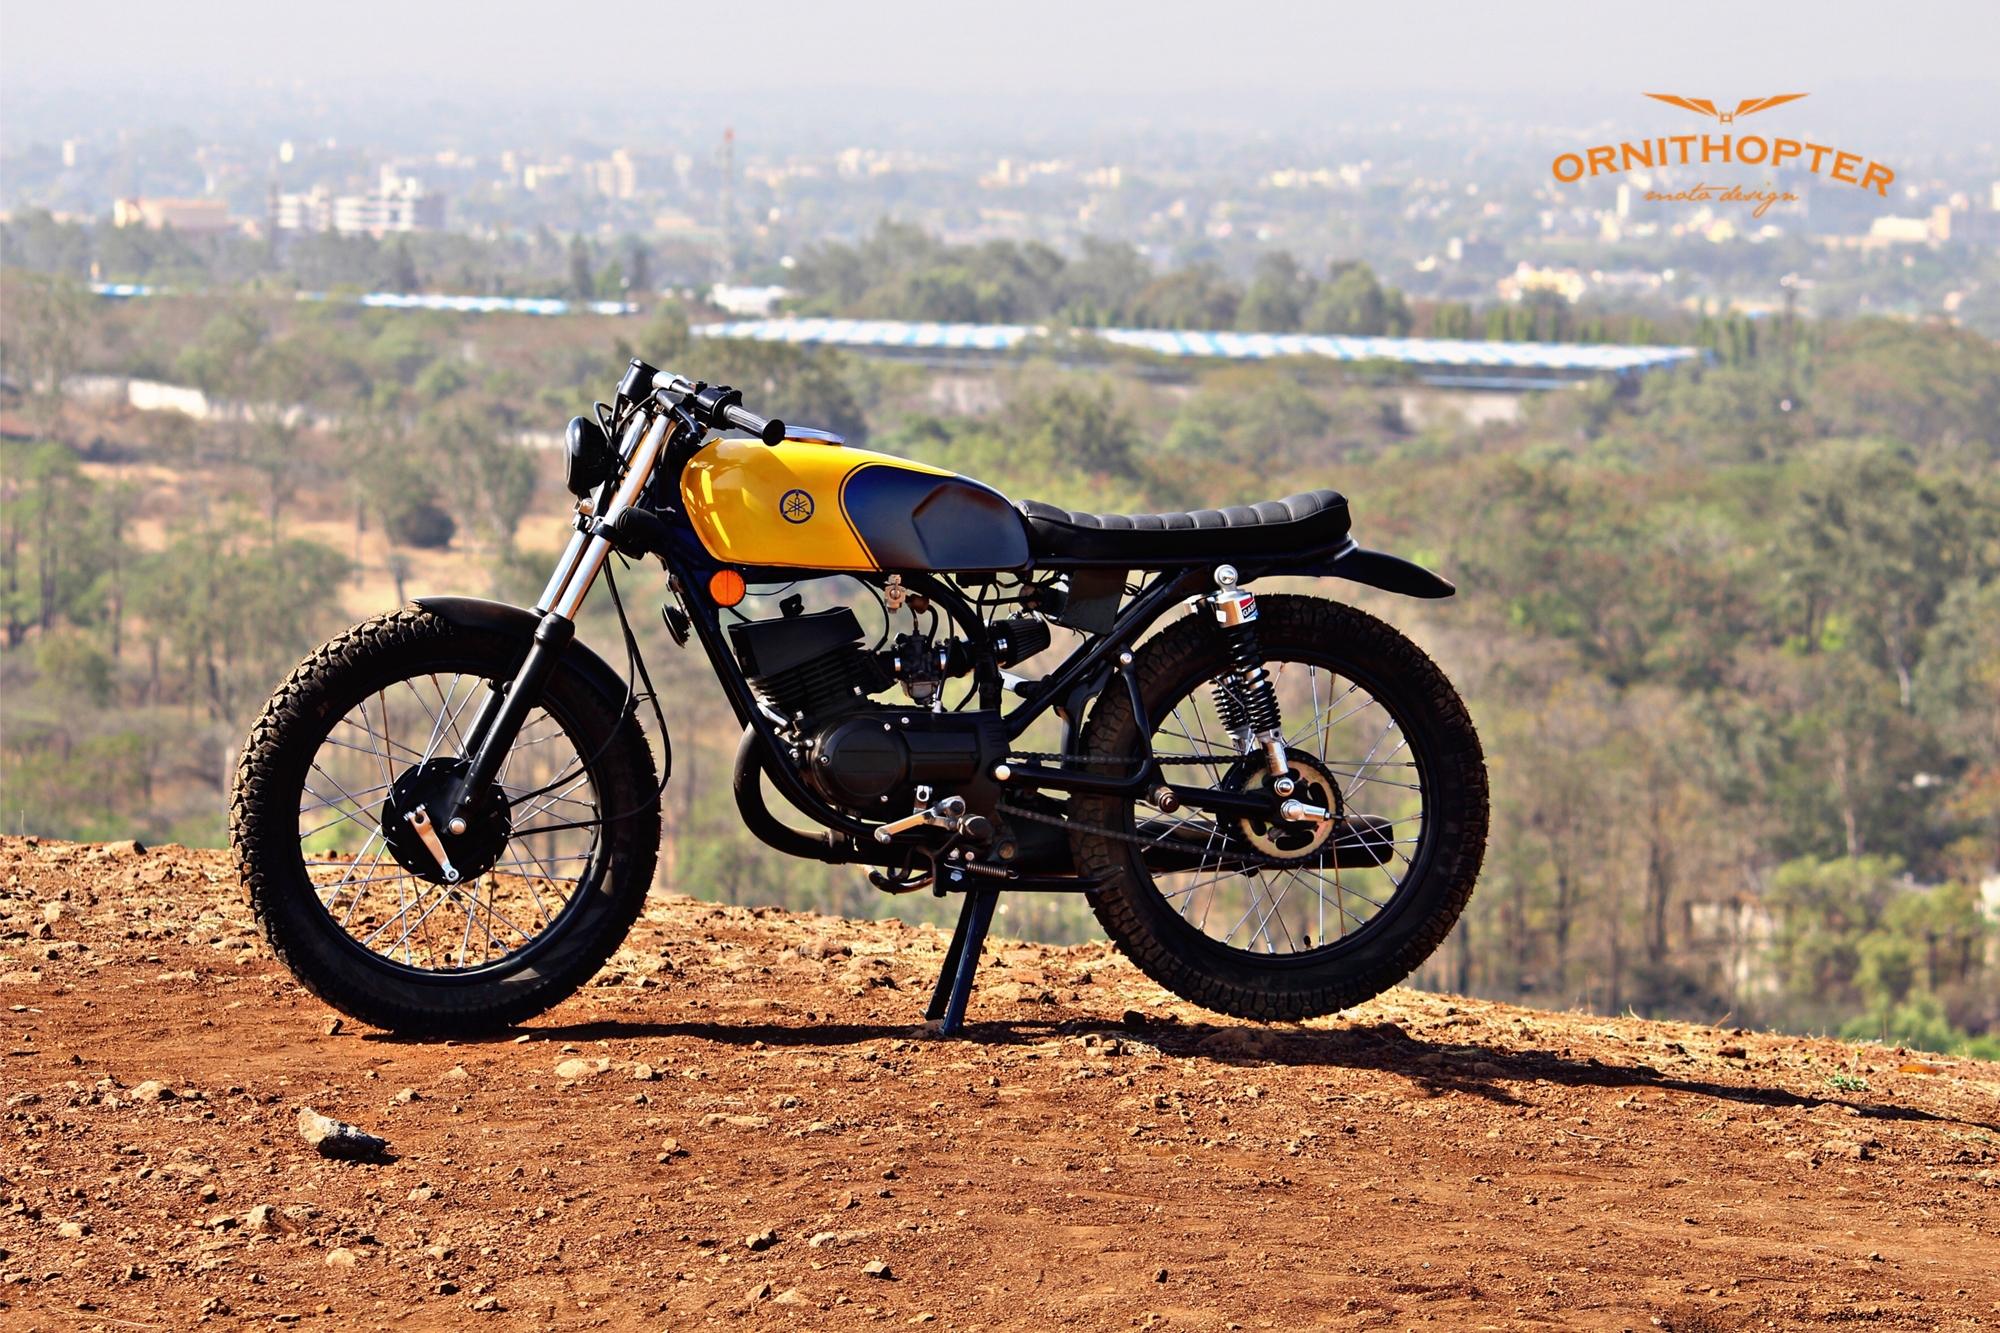 Modified Yamaha Rx100 By Ornithopter Is A Scrambler Cafe Racer